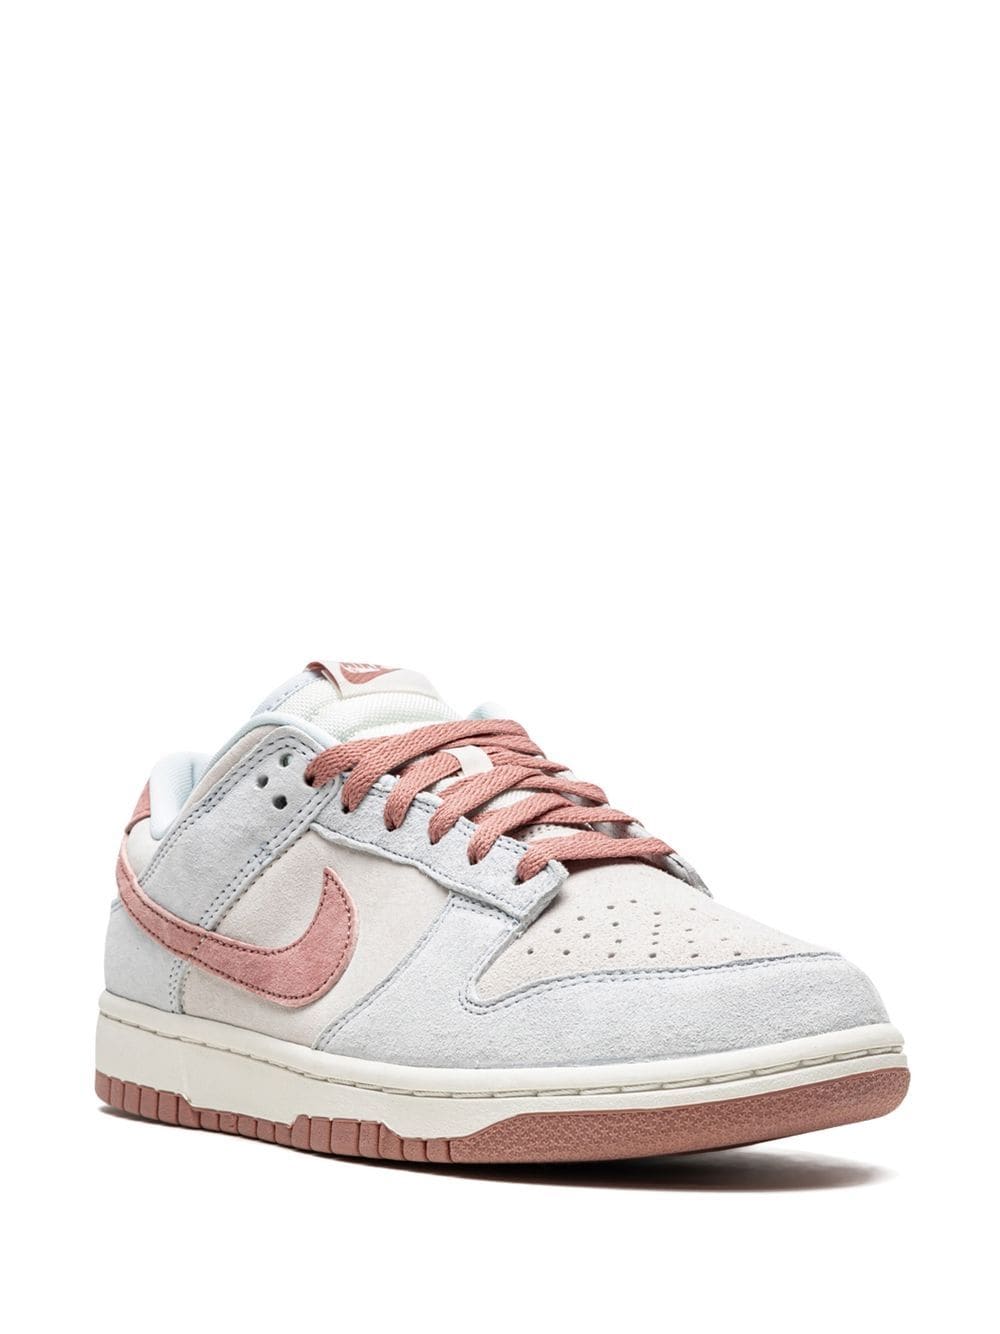 NIKE dunk low fossil rose 28.5cm